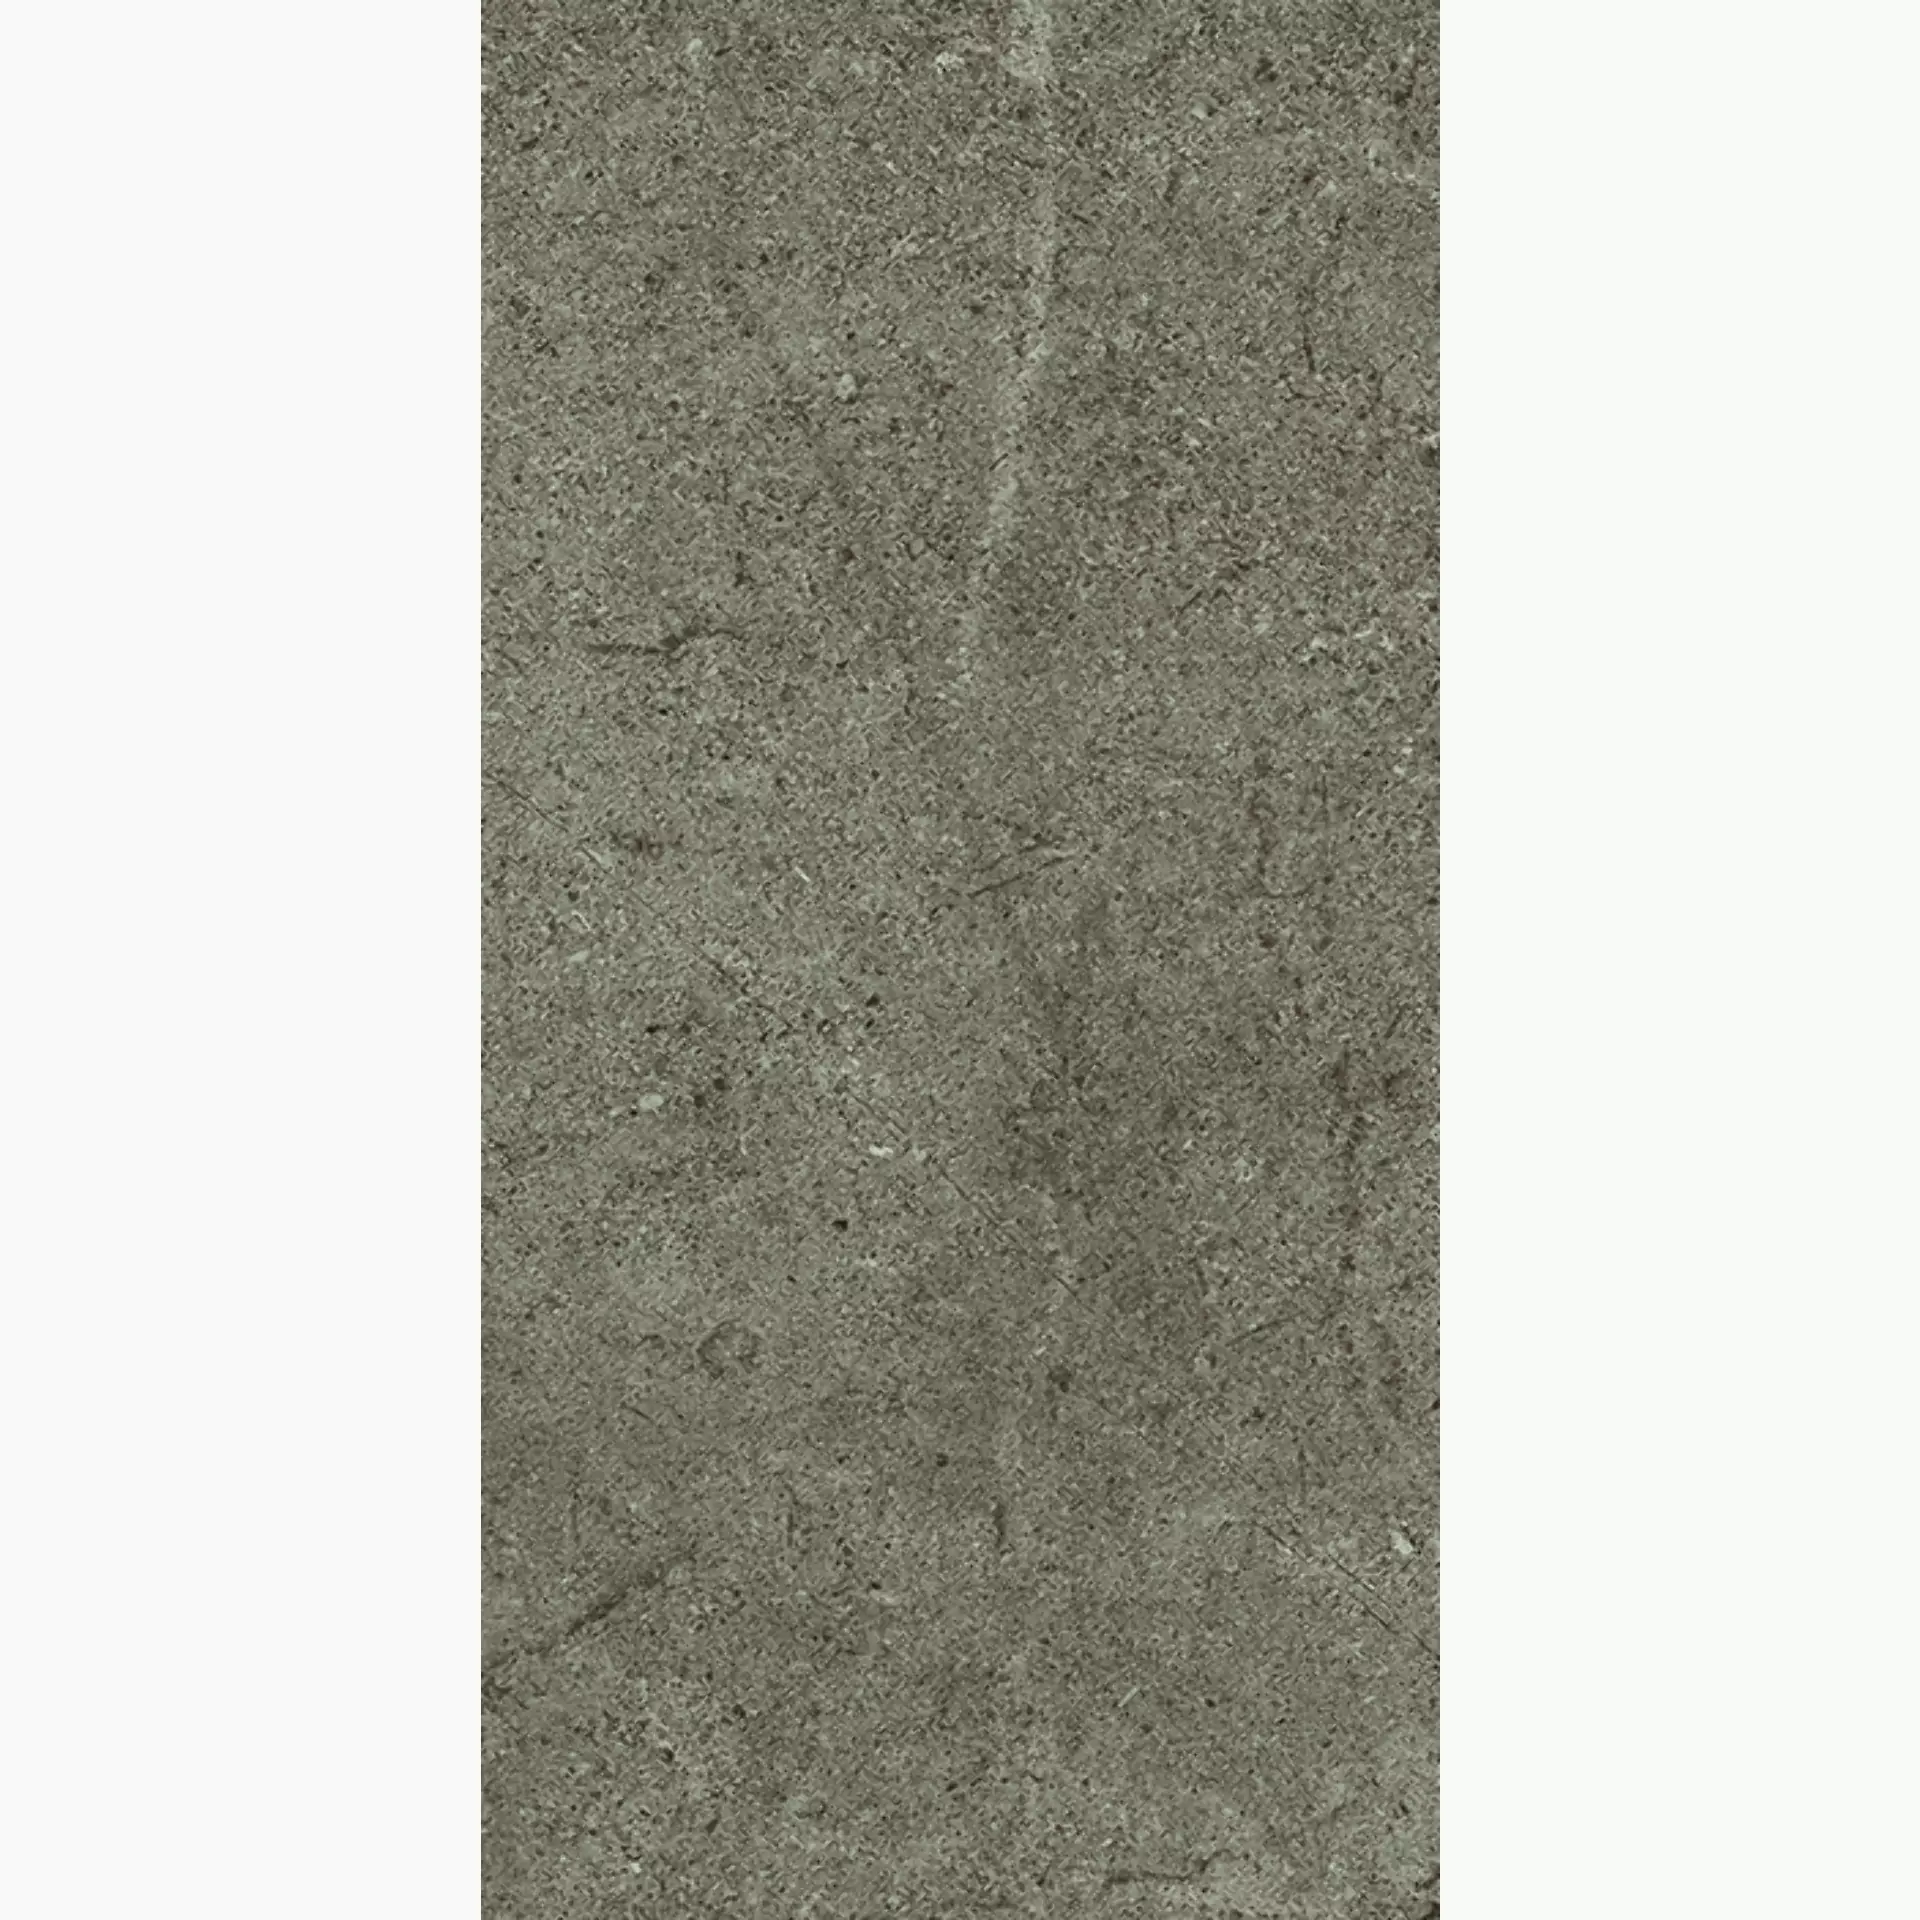 Cercom Archistone Taupe Naturale 1081727 60x120cm rectified 9,5mm